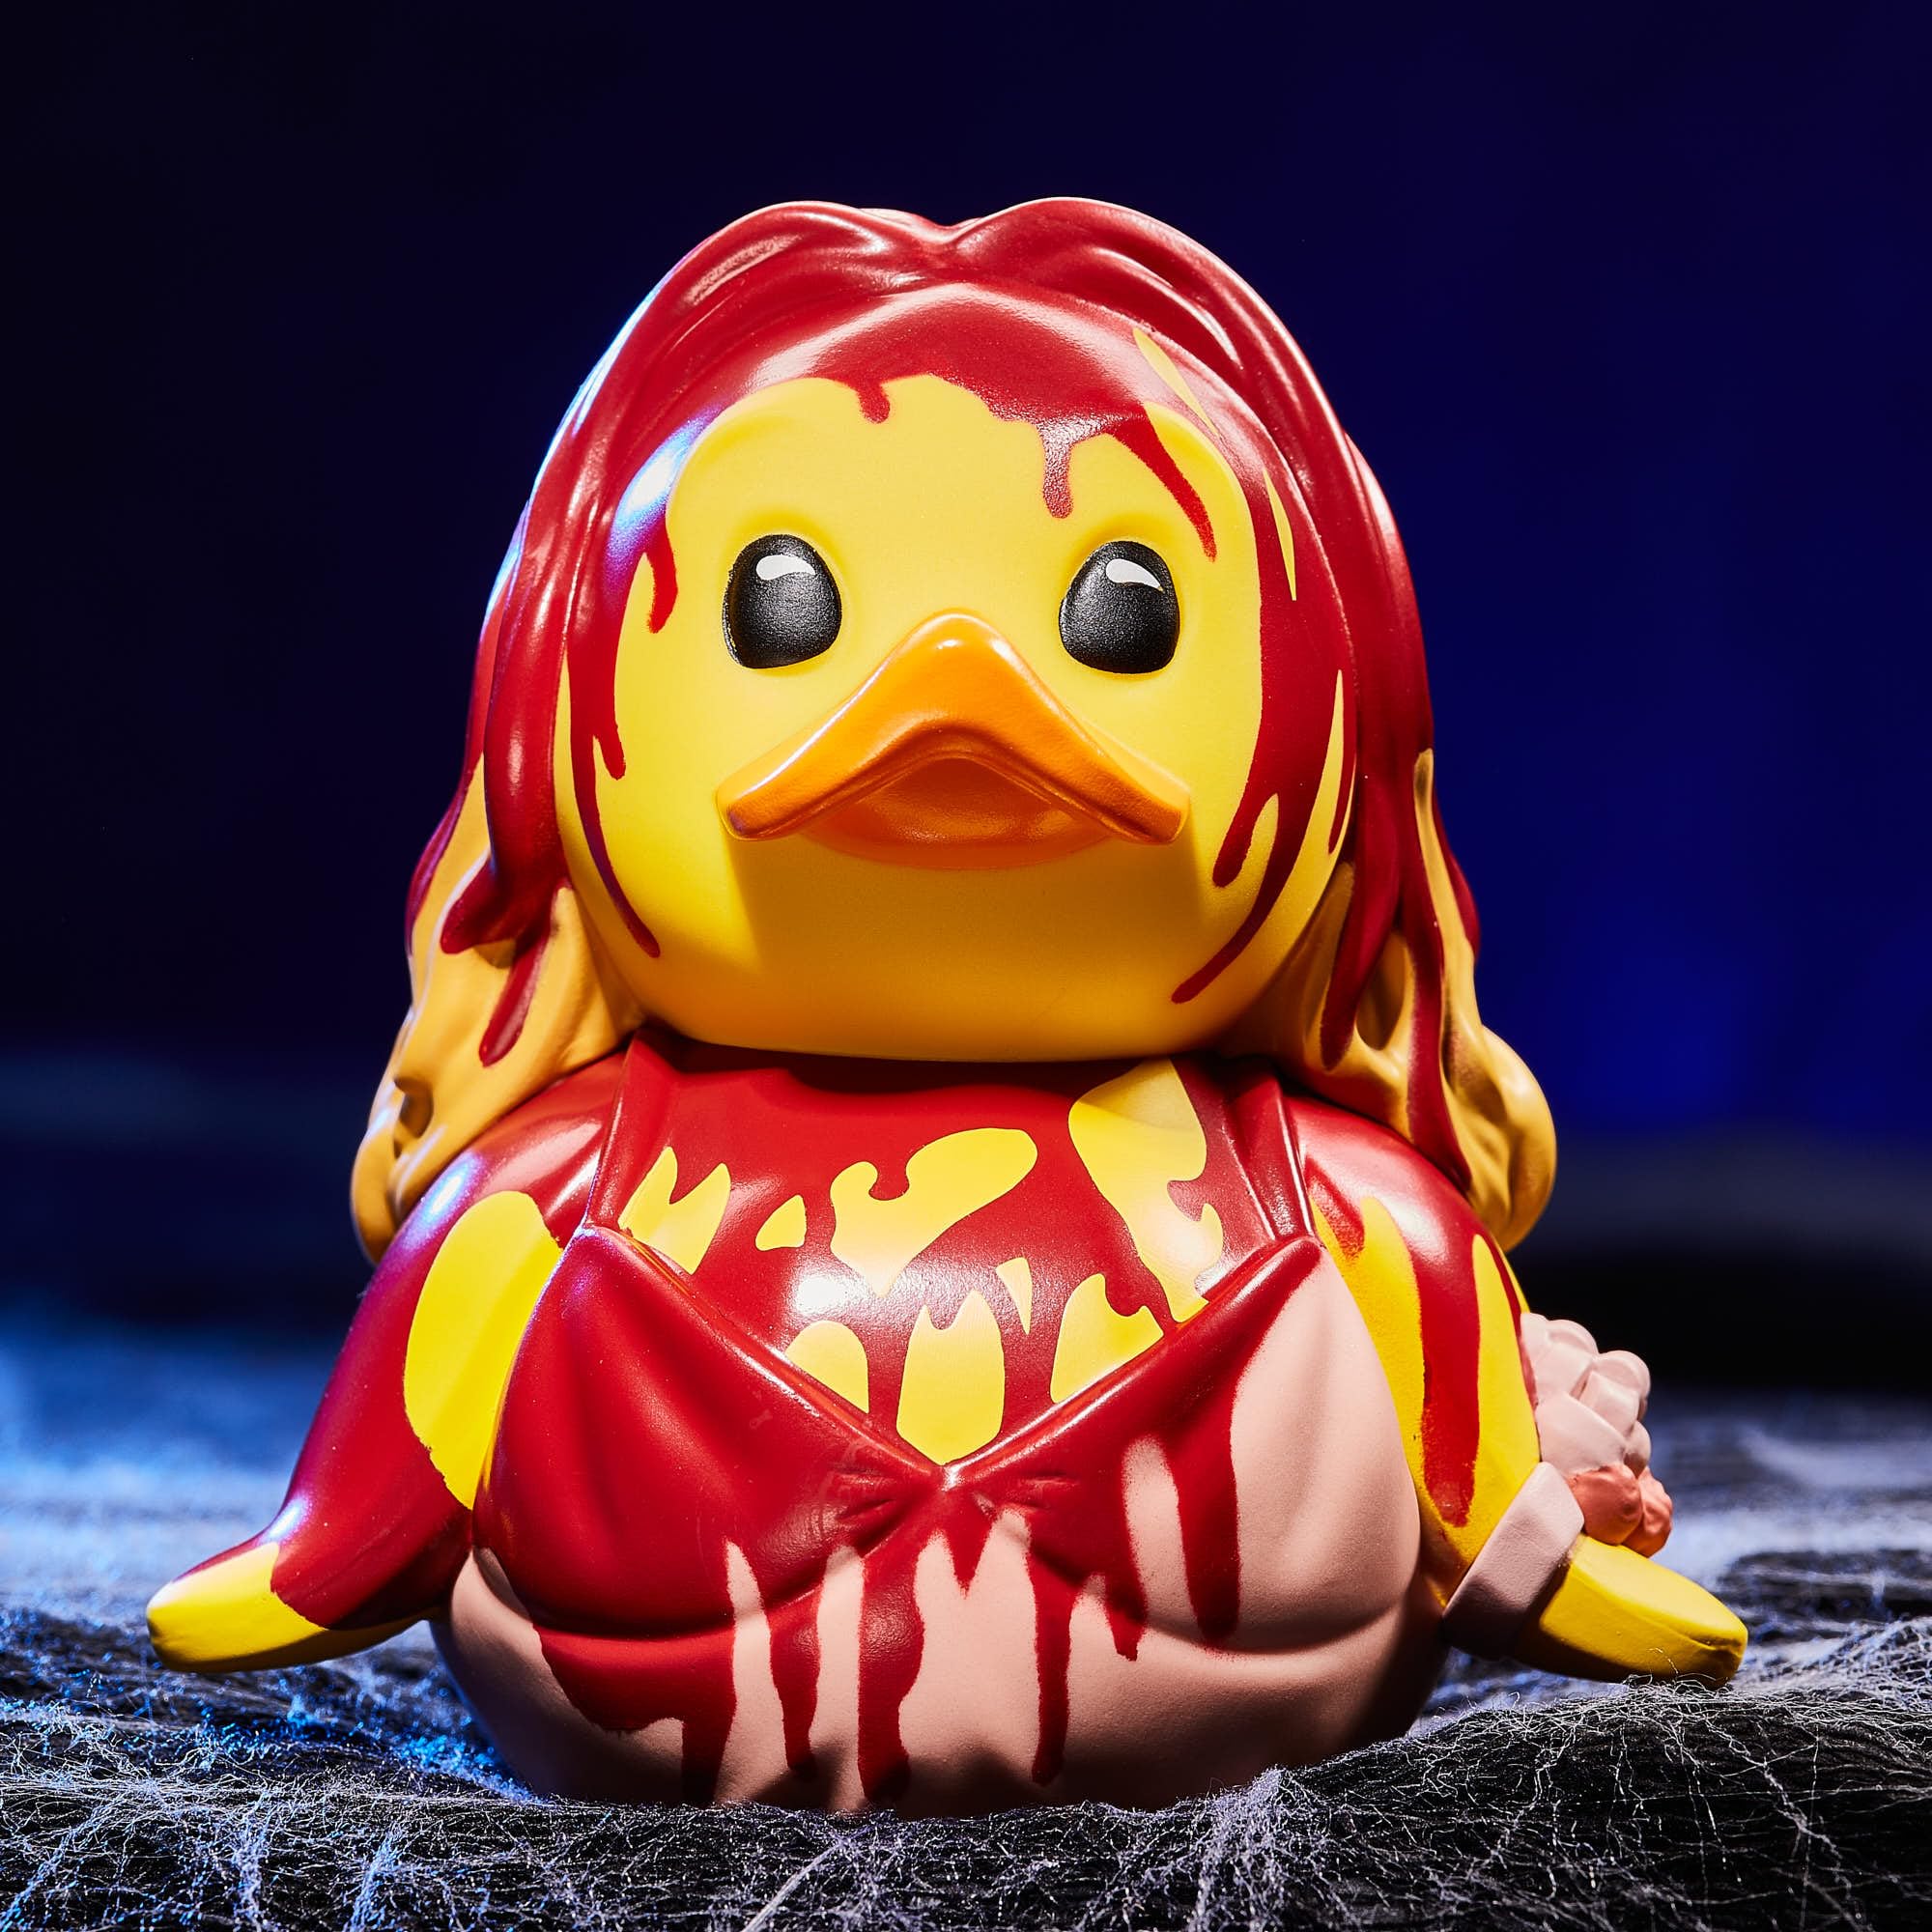 TUBBZ First Edition Carrie Collectible Vinyl Rubber Duck Figure - Official Carrie Merchandise - Horror TV, Movies & Books